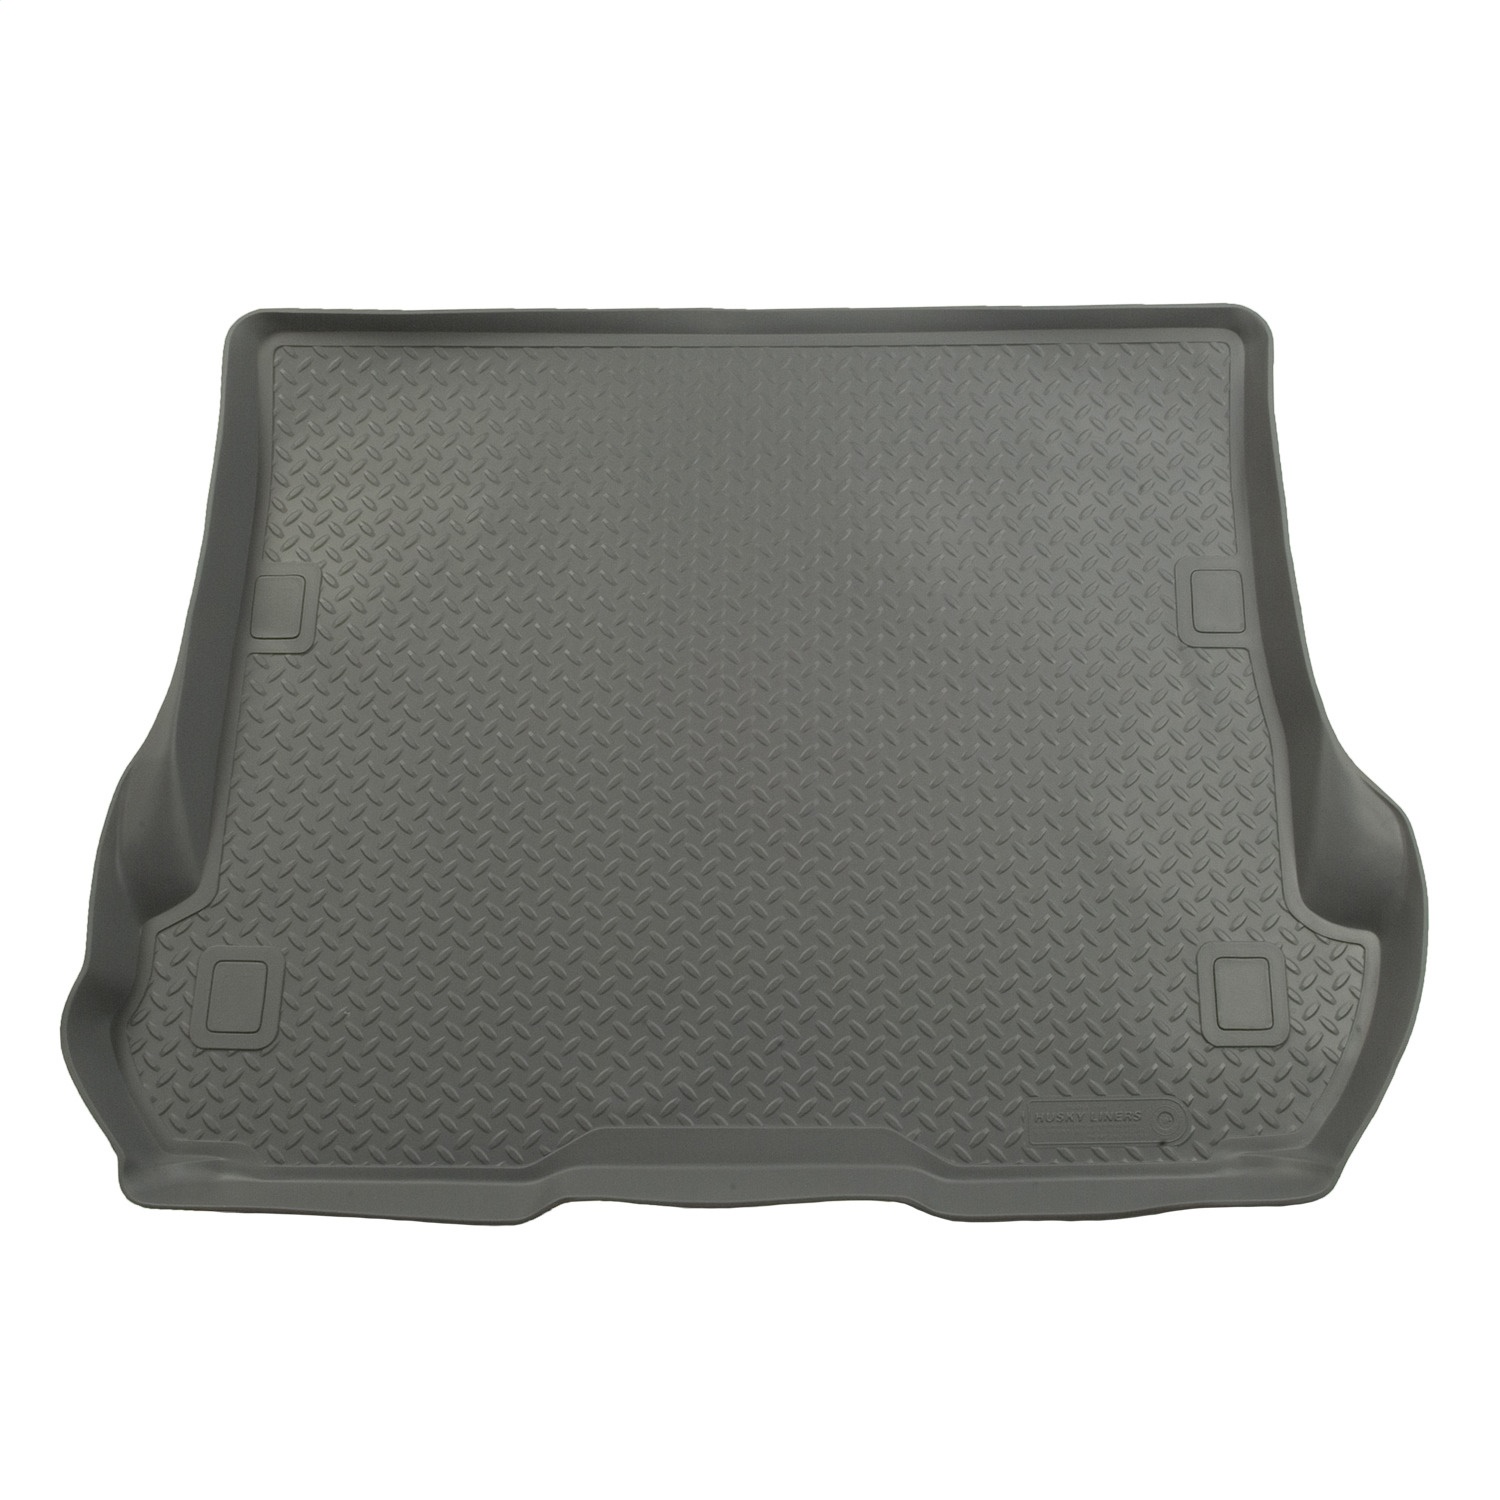 Husky Liners Husky Liners 24302 Classic Style; Cargo Liner Fits 01-07 MDX Pilot